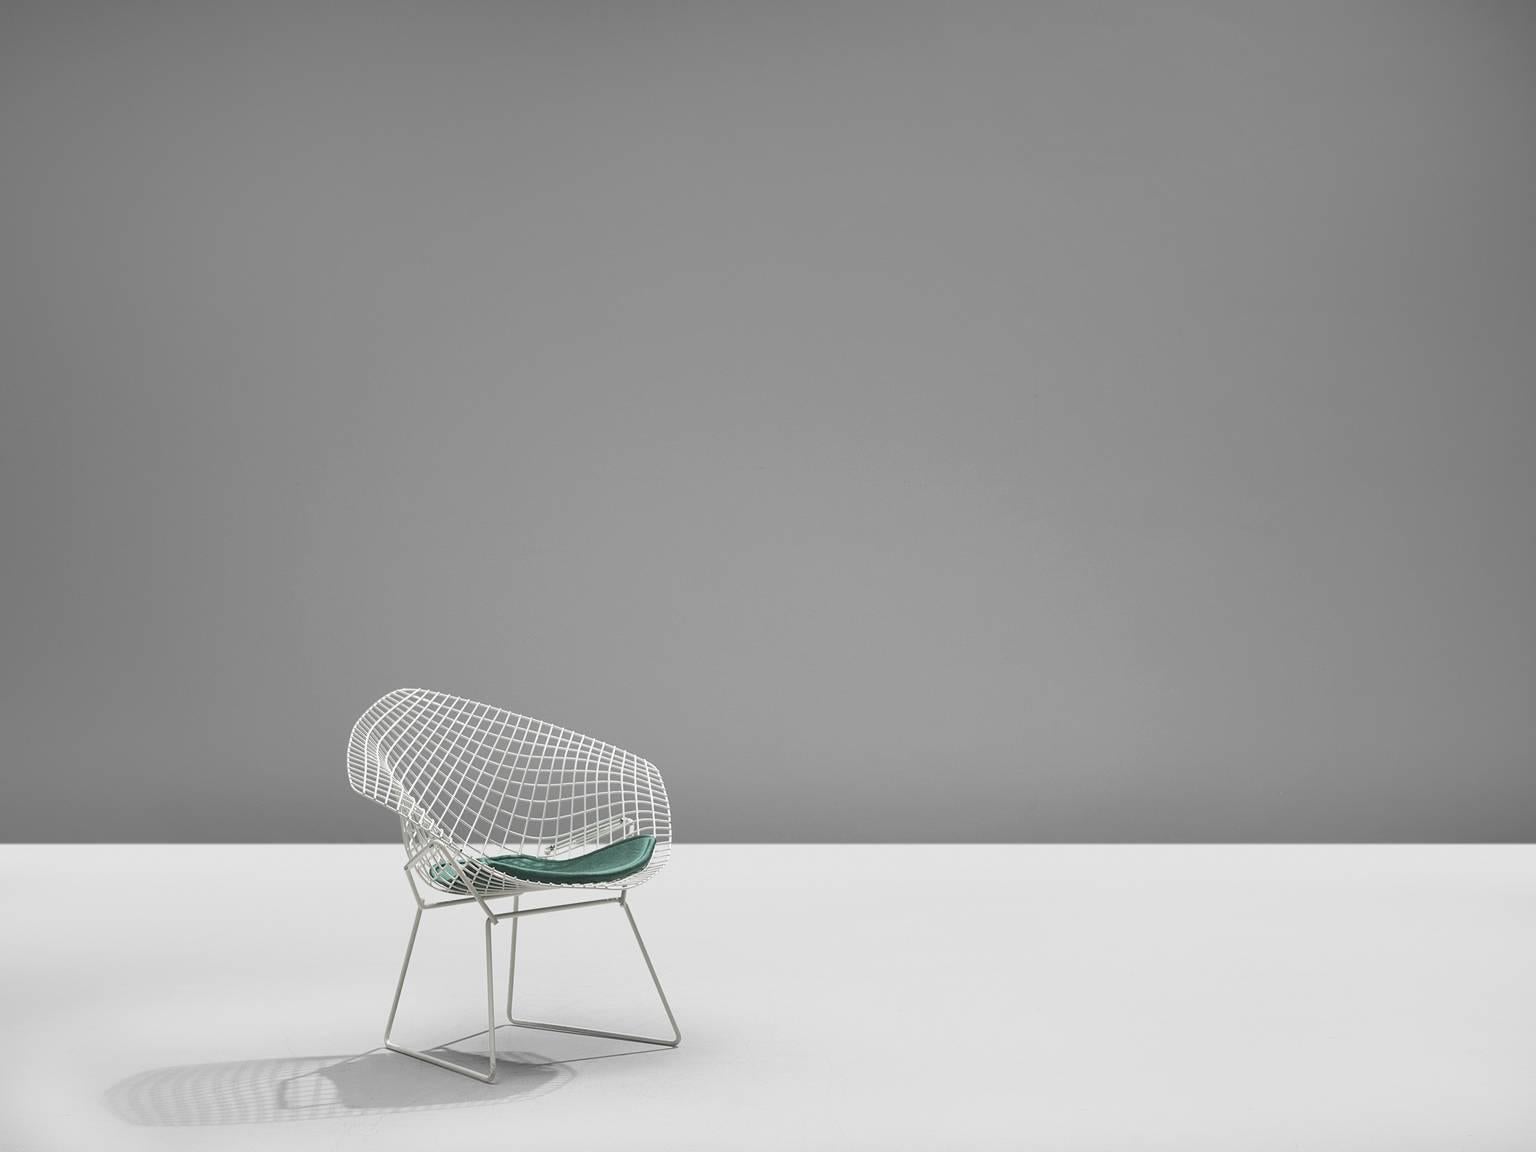 'Diamond' chair by Harry Bertoia for Knoll, white coated metal, turquoise cushion, 1950s (later production)

The Diamond Chair is, according to Knoll, an astounding study in space, form and function by one of the master sculptors of the last